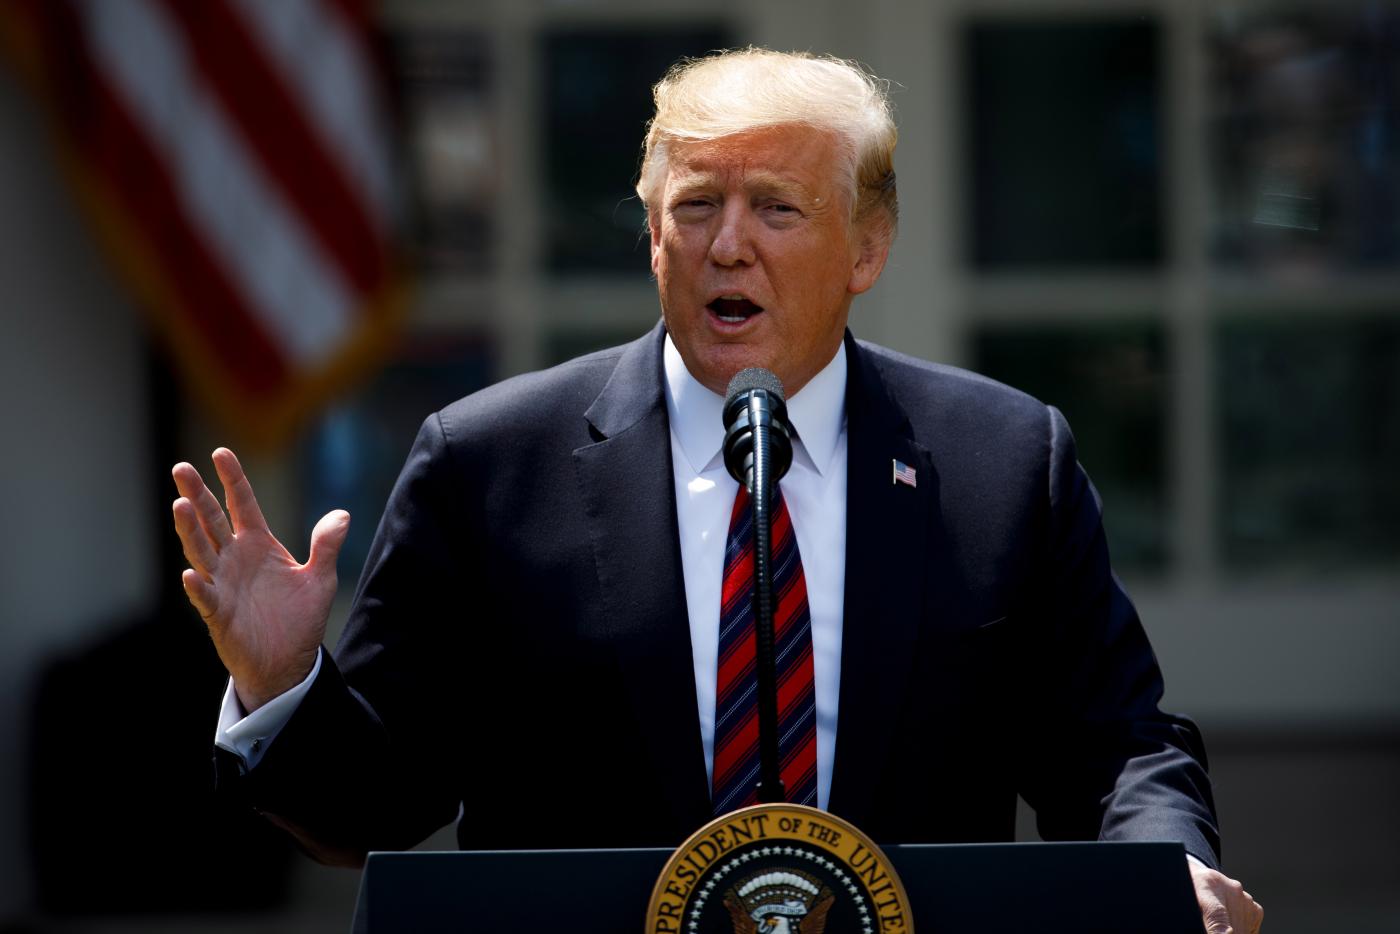 WASHINGTON, May 16, 2019 (Xinhua) -- U.S. President Donald Trump speaks regarding immigration reform at the White House in Washington D.C., the United States, on May 16, 2019. Donald Trump unveiled a plan on Thursday to reform the nation's immigration system, intended to favor high-skilled immigrants and restrict family-based migration. (Xinhua/Ting Shen/IANS) by Ting Shen. 